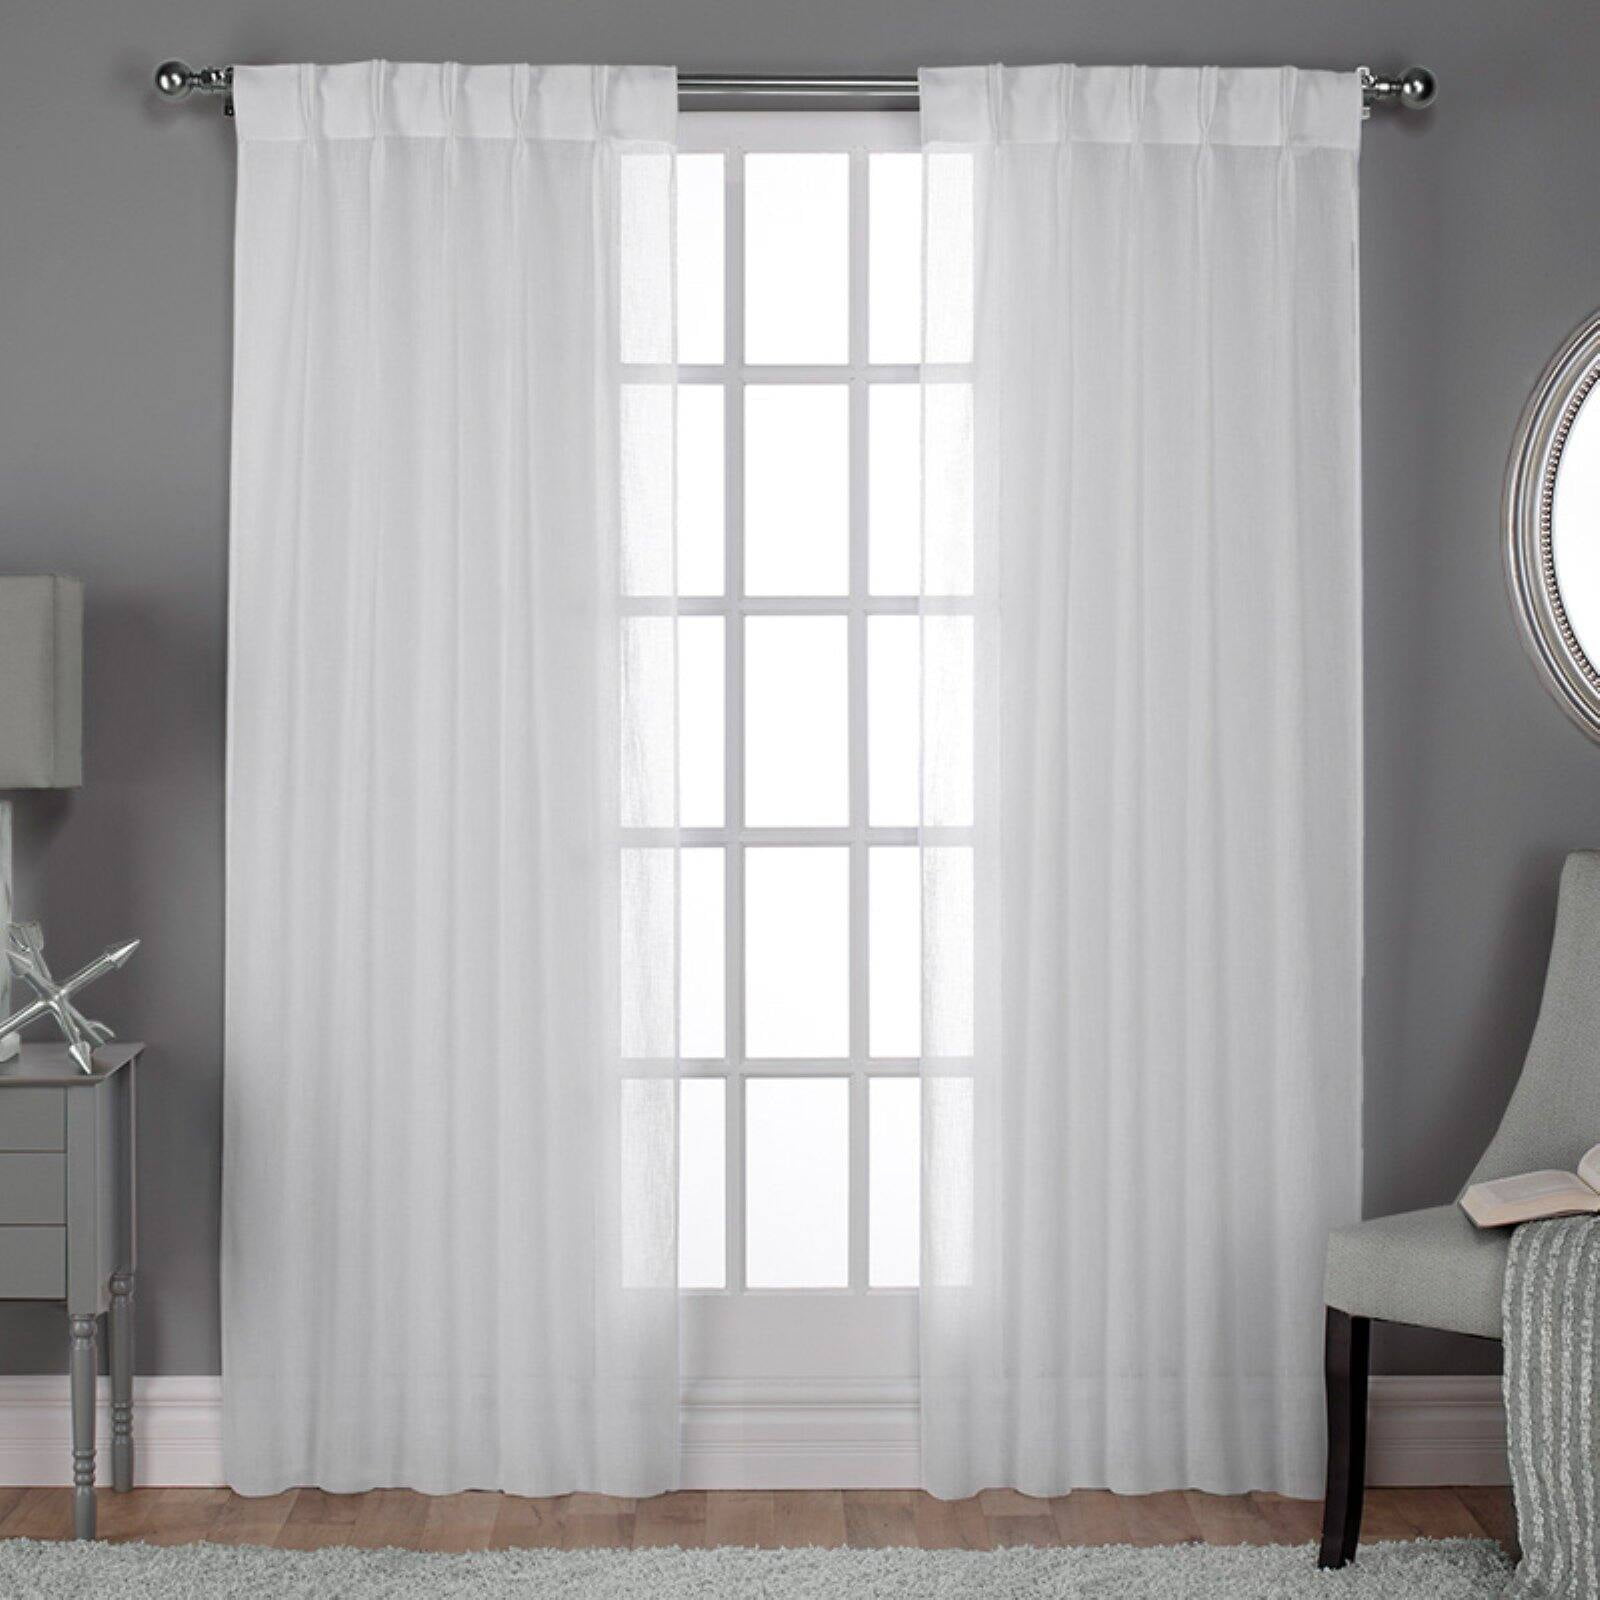 Pair 2 of 72"W x 84"L Stylemaster® Splendor Pinch Pleated Drapes Ivory White 